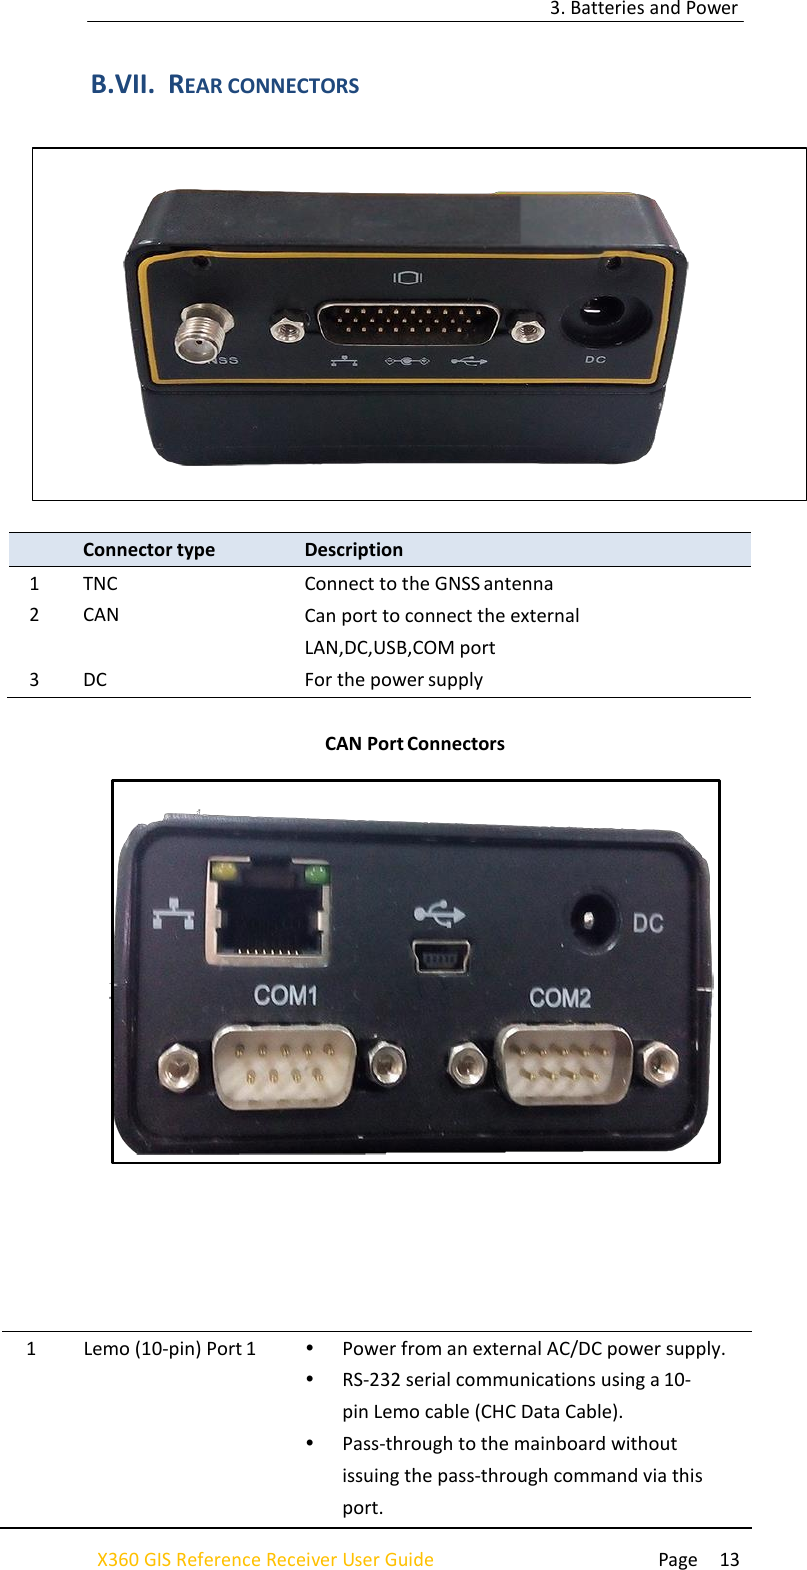 3. Batteries and Power  Page 13 X360 GIS Reference Receiver User Guide    B.VII. REAR CONNECTORS      Connector type Description 1 TNC Connect to the GNSS antenna 2 CAN Can port to connect the external LAN,DC,USB,COM port 3 DC For the power supply  CAN Port Connectors         1 Lemo (10-pin) Port 1  Power from an external AC/DC power supply.  RS-232 serial communications using a 10-pin Lemo cable (CHC Data Cable).  Pass-through to the mainboard without issuing the pass-through command via this port.     